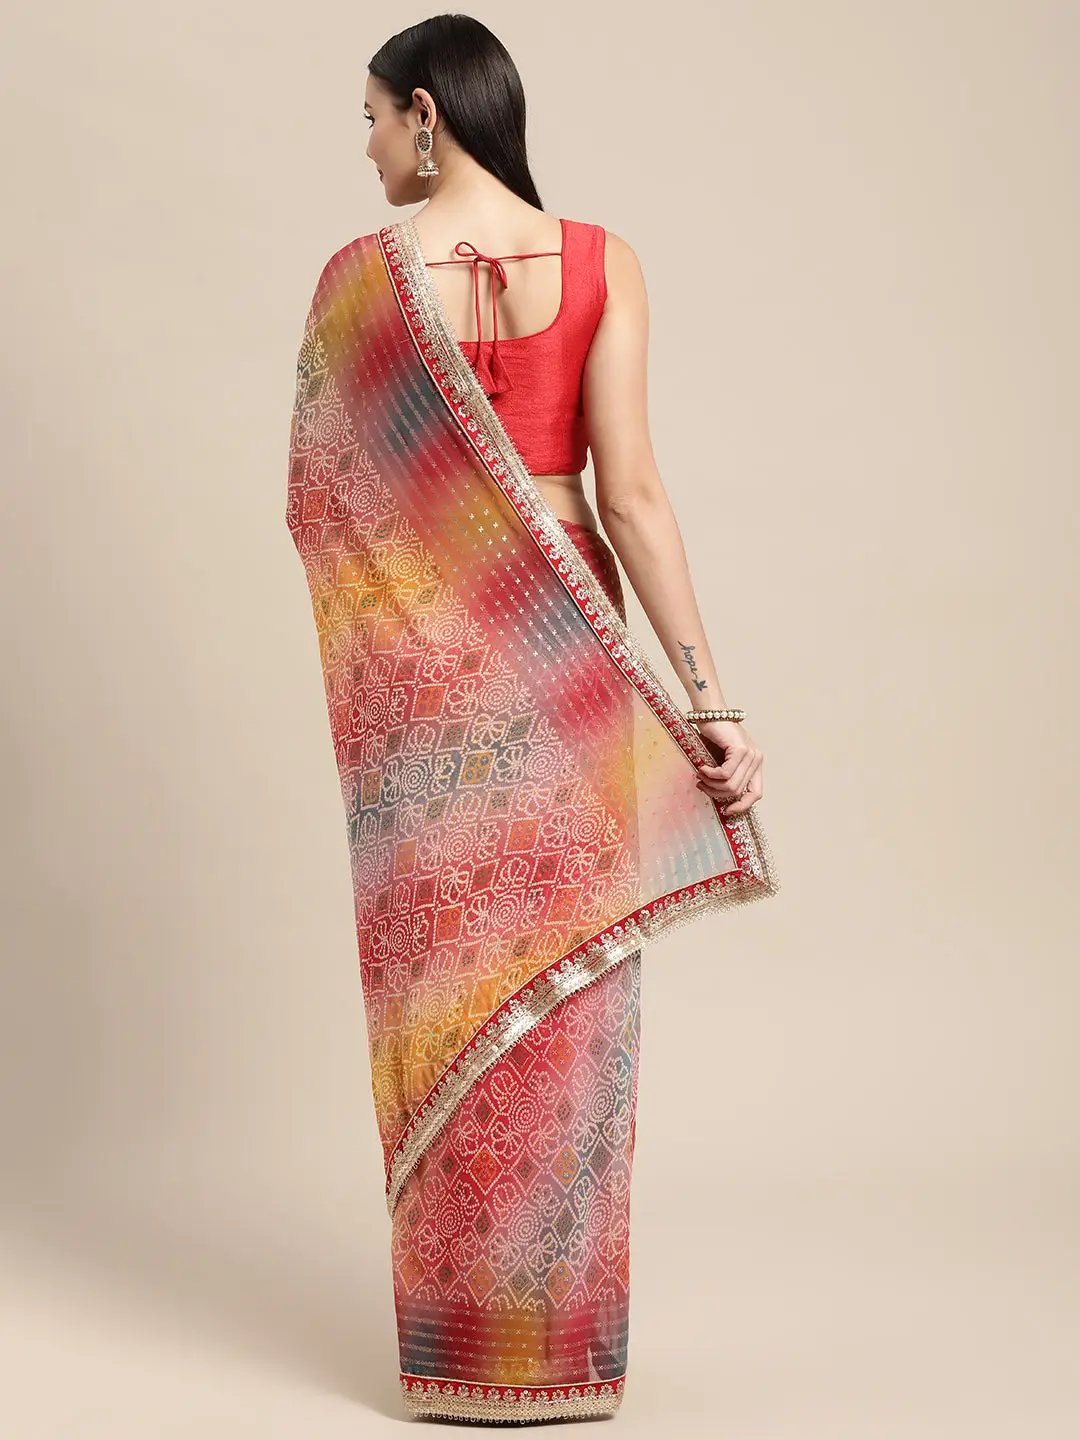 Georgette Bandhani Saree with foil print and lace border